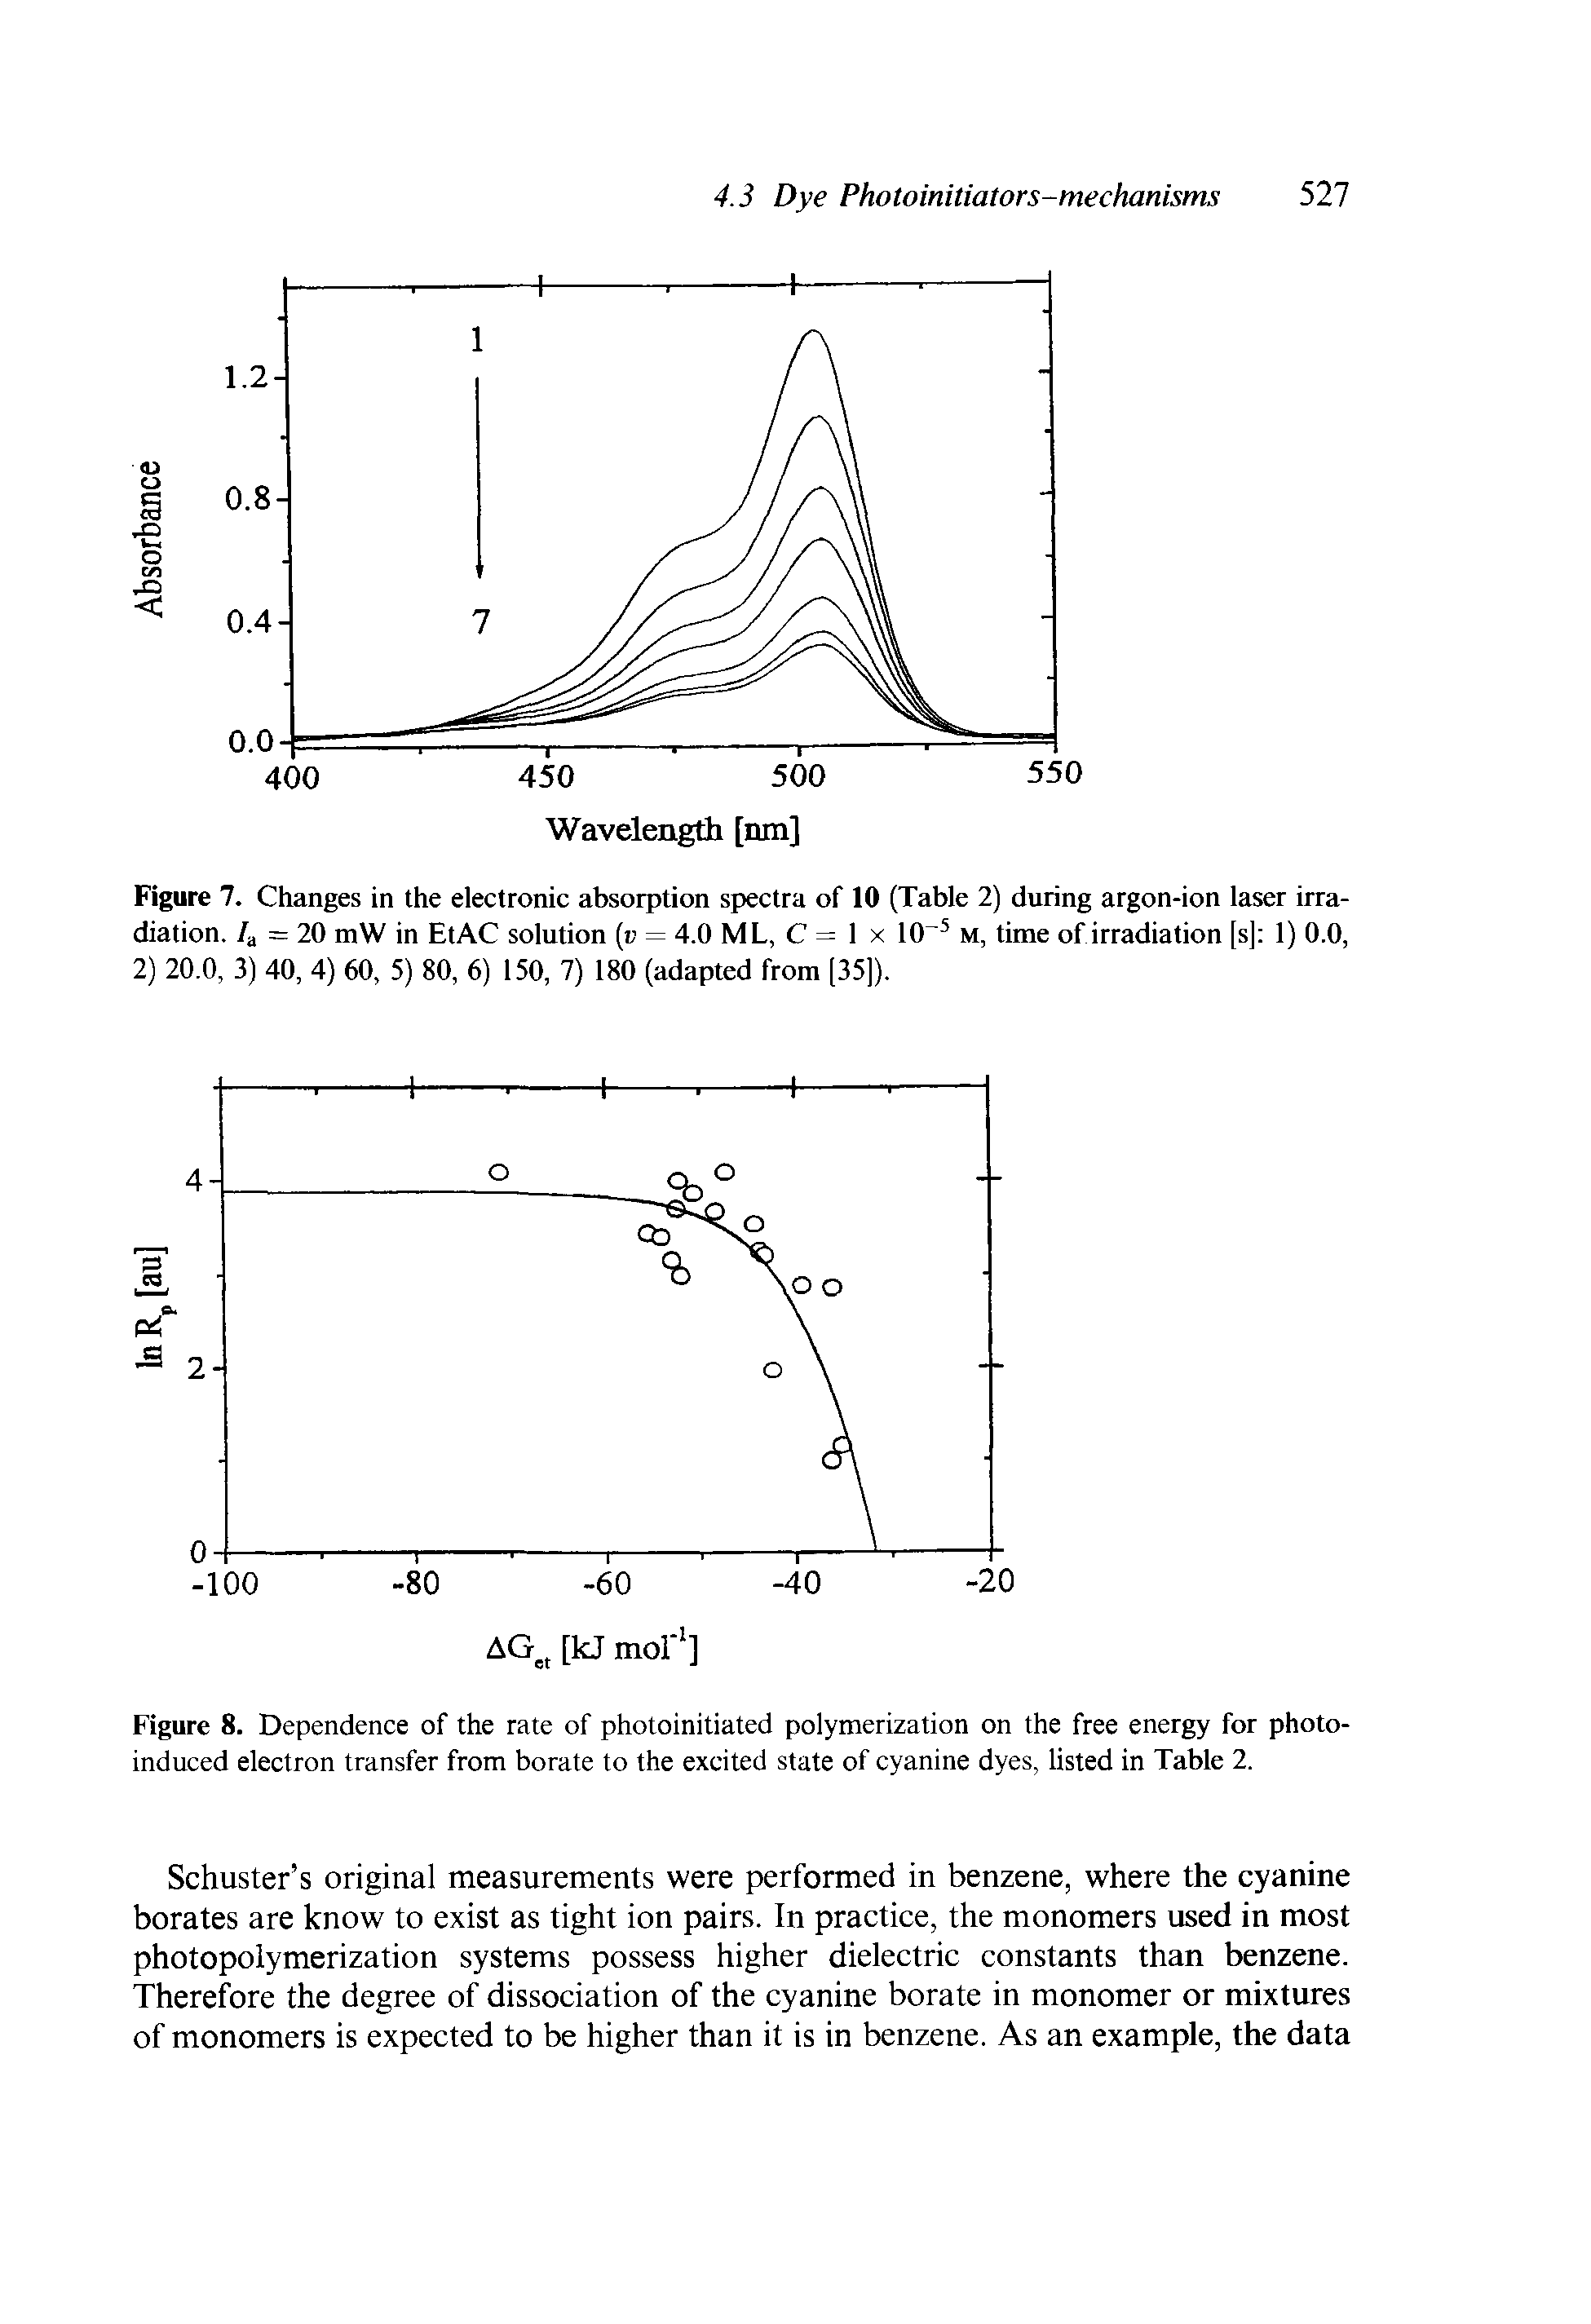 Figure 8. Dependence of the rate of photoinitiated polymerization on the free energy for photo-induced electron transfer from borate to the excited state of cyanine dyes, listed in Table 2.